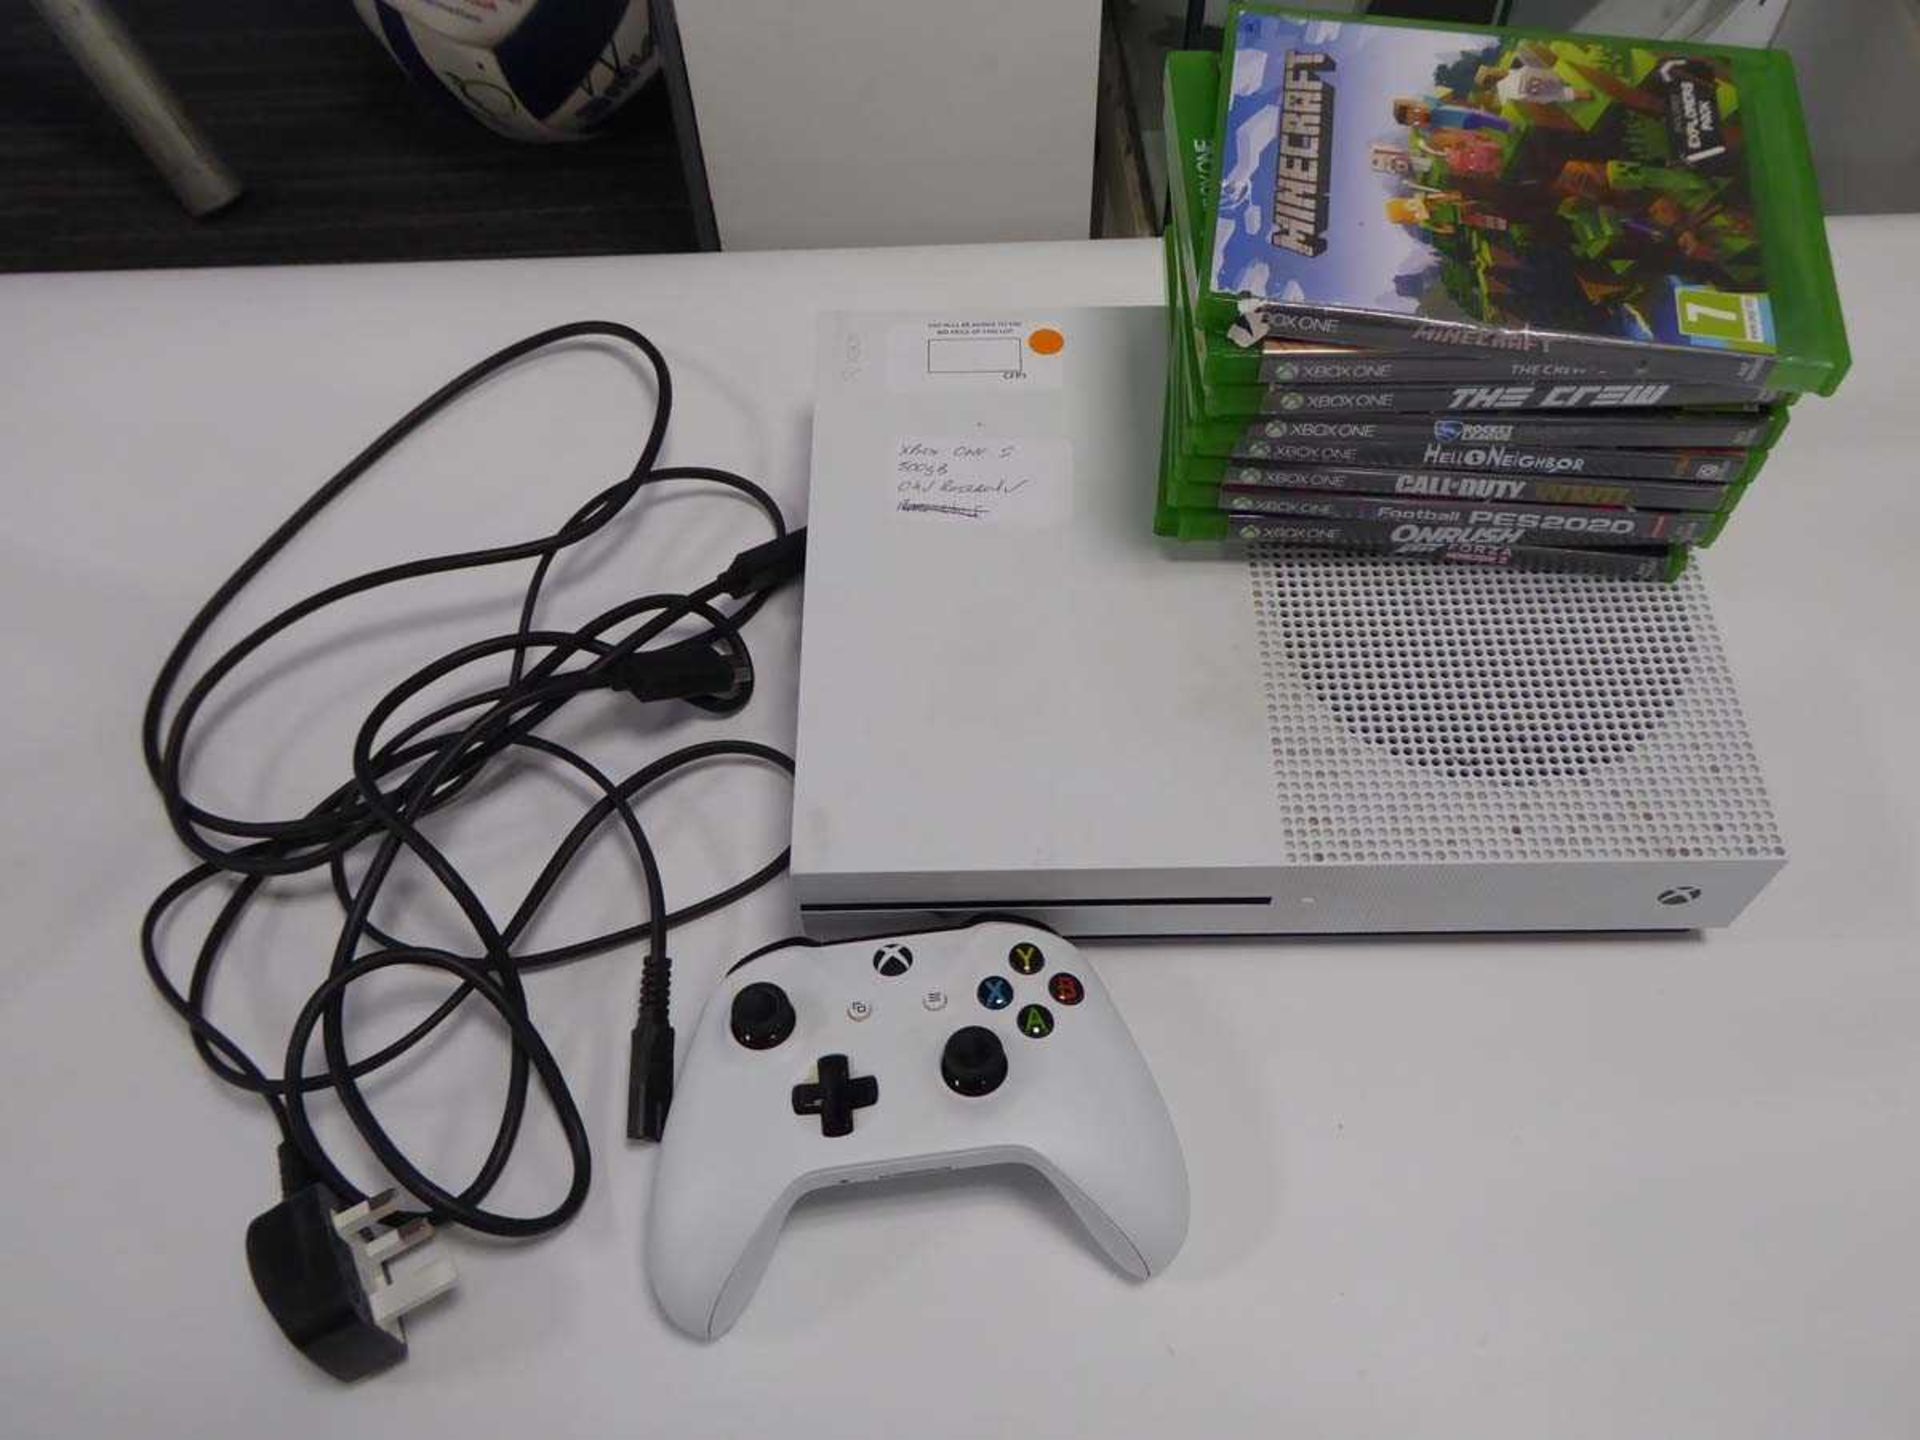 +VAT Xbox One S 500gb storage, includes controller, power cable, and games